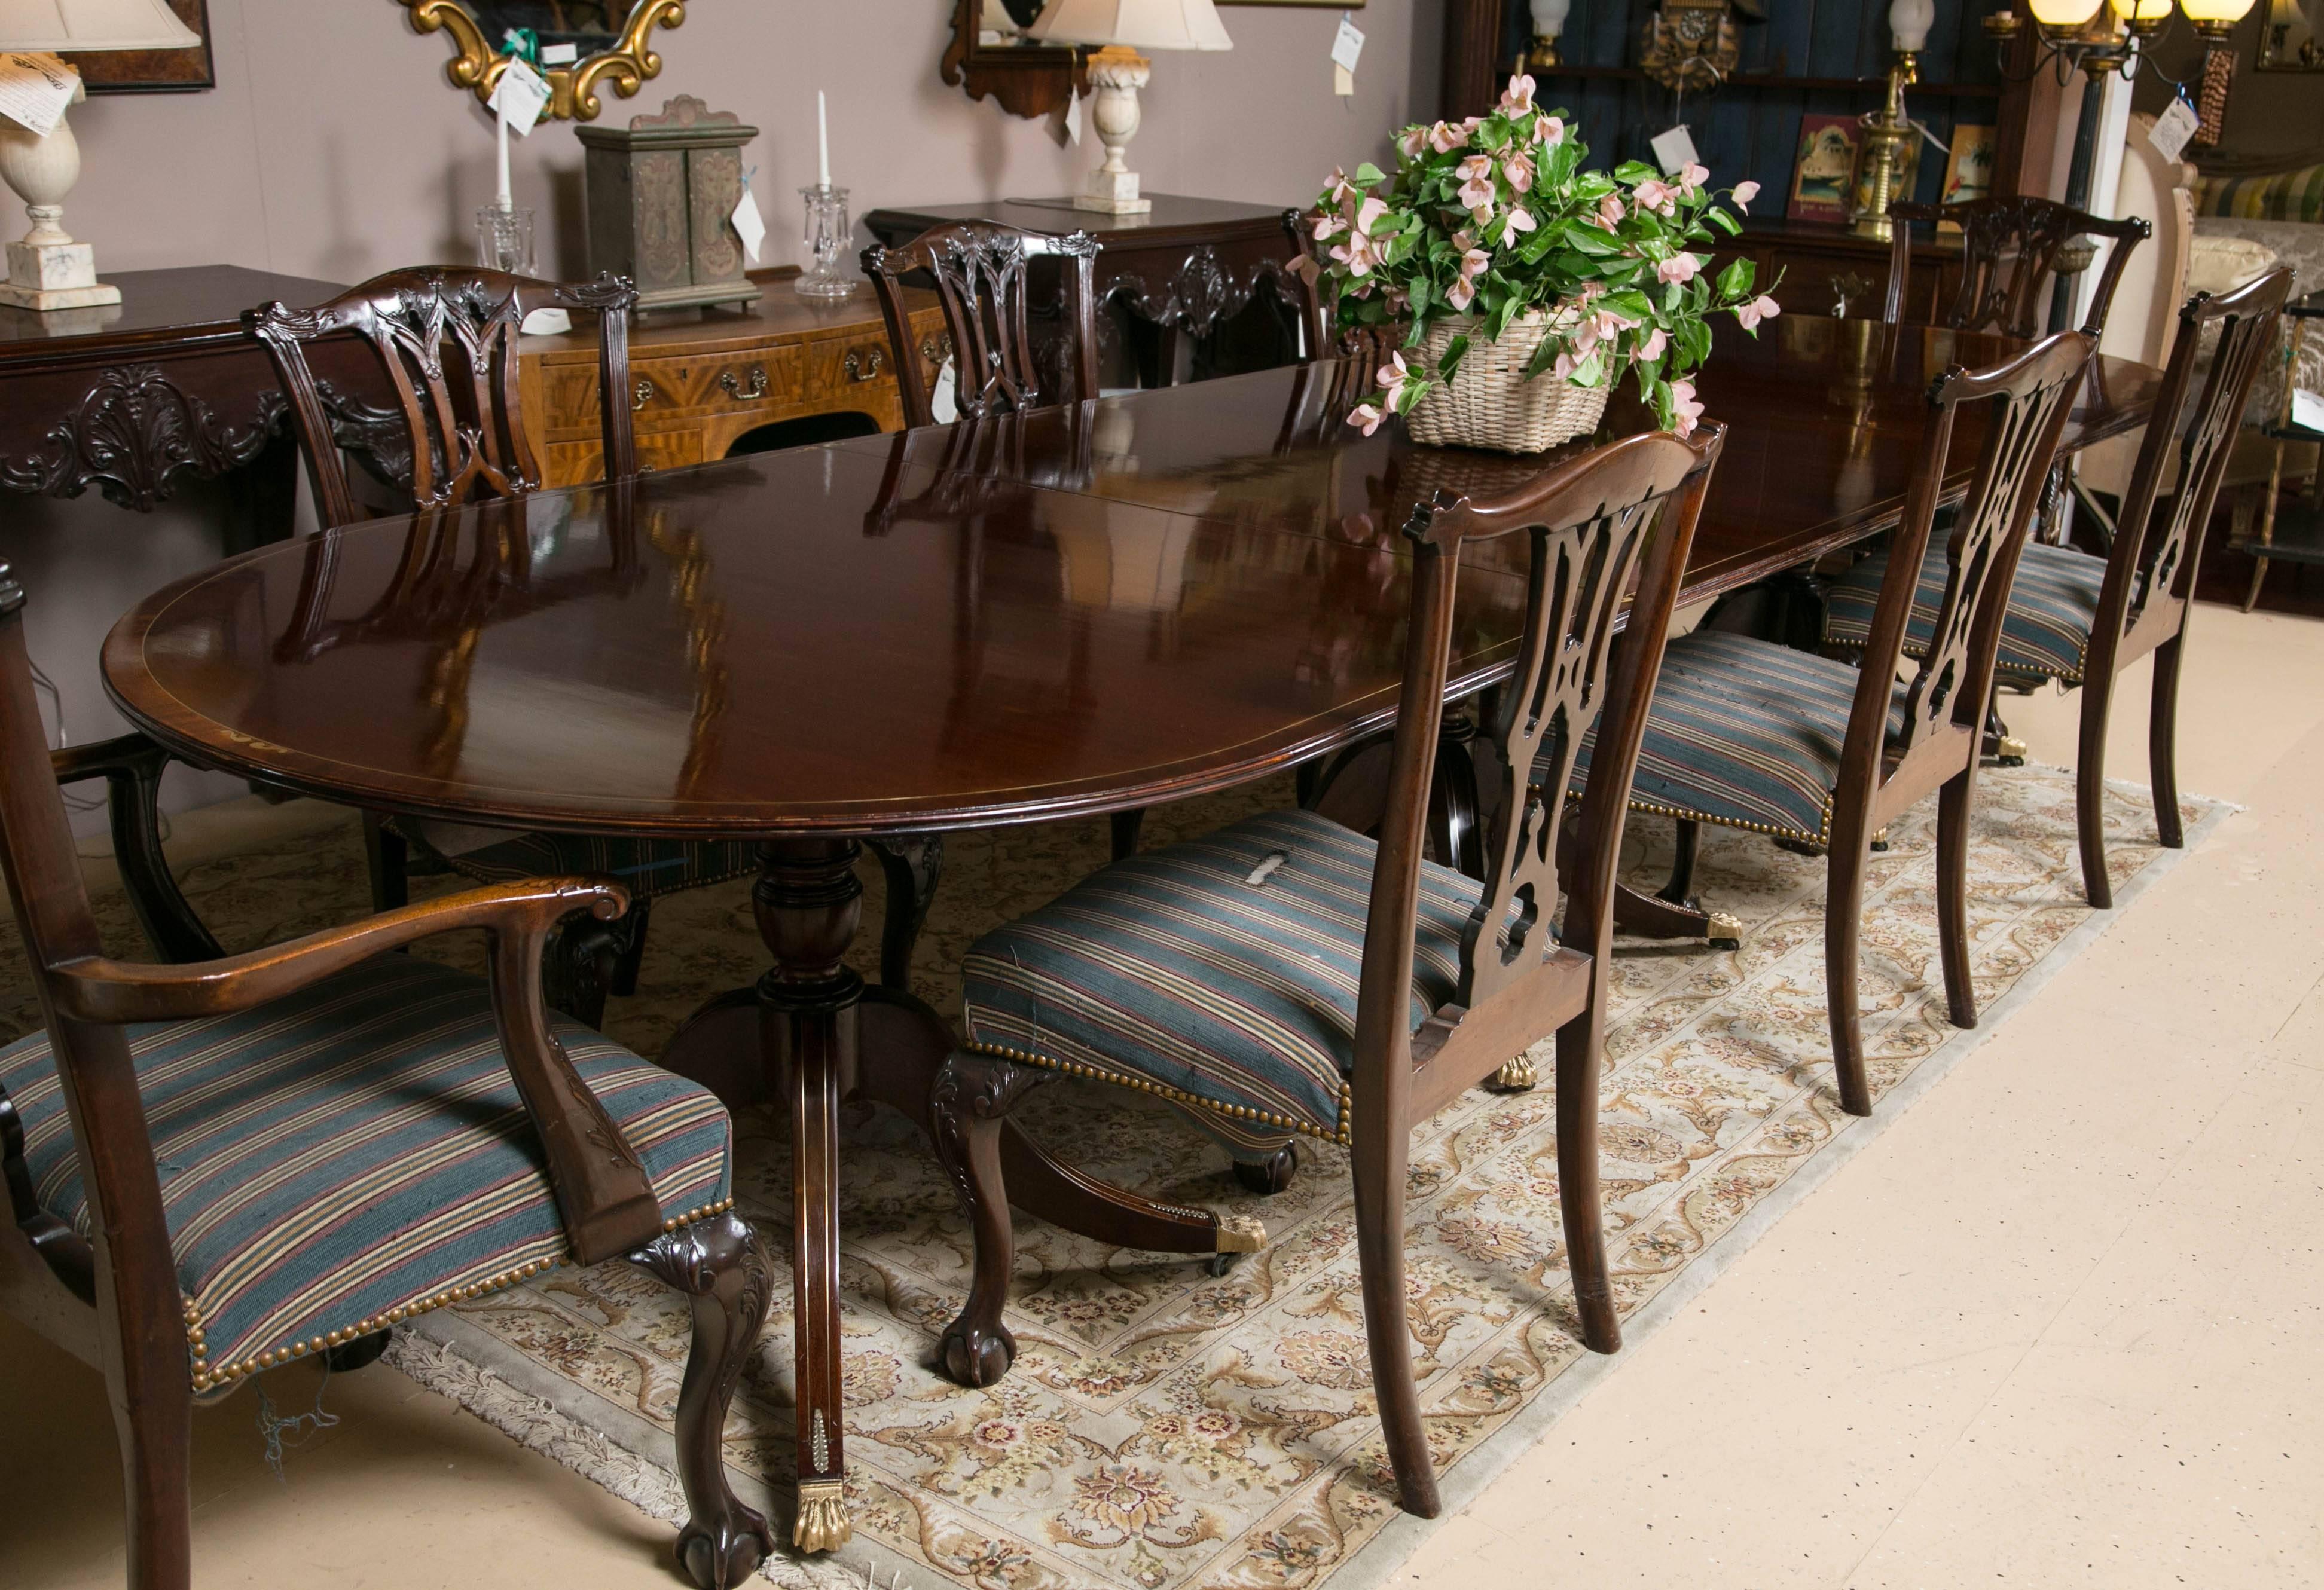 Finest Georgian boule inlaid solid rosewood triple pedestal banquet table. An impossible find located on long islands gold coast comes this solid rosewood dining room table with a wonderful boule (brass) detailed inlay. The quad form boule inlaid